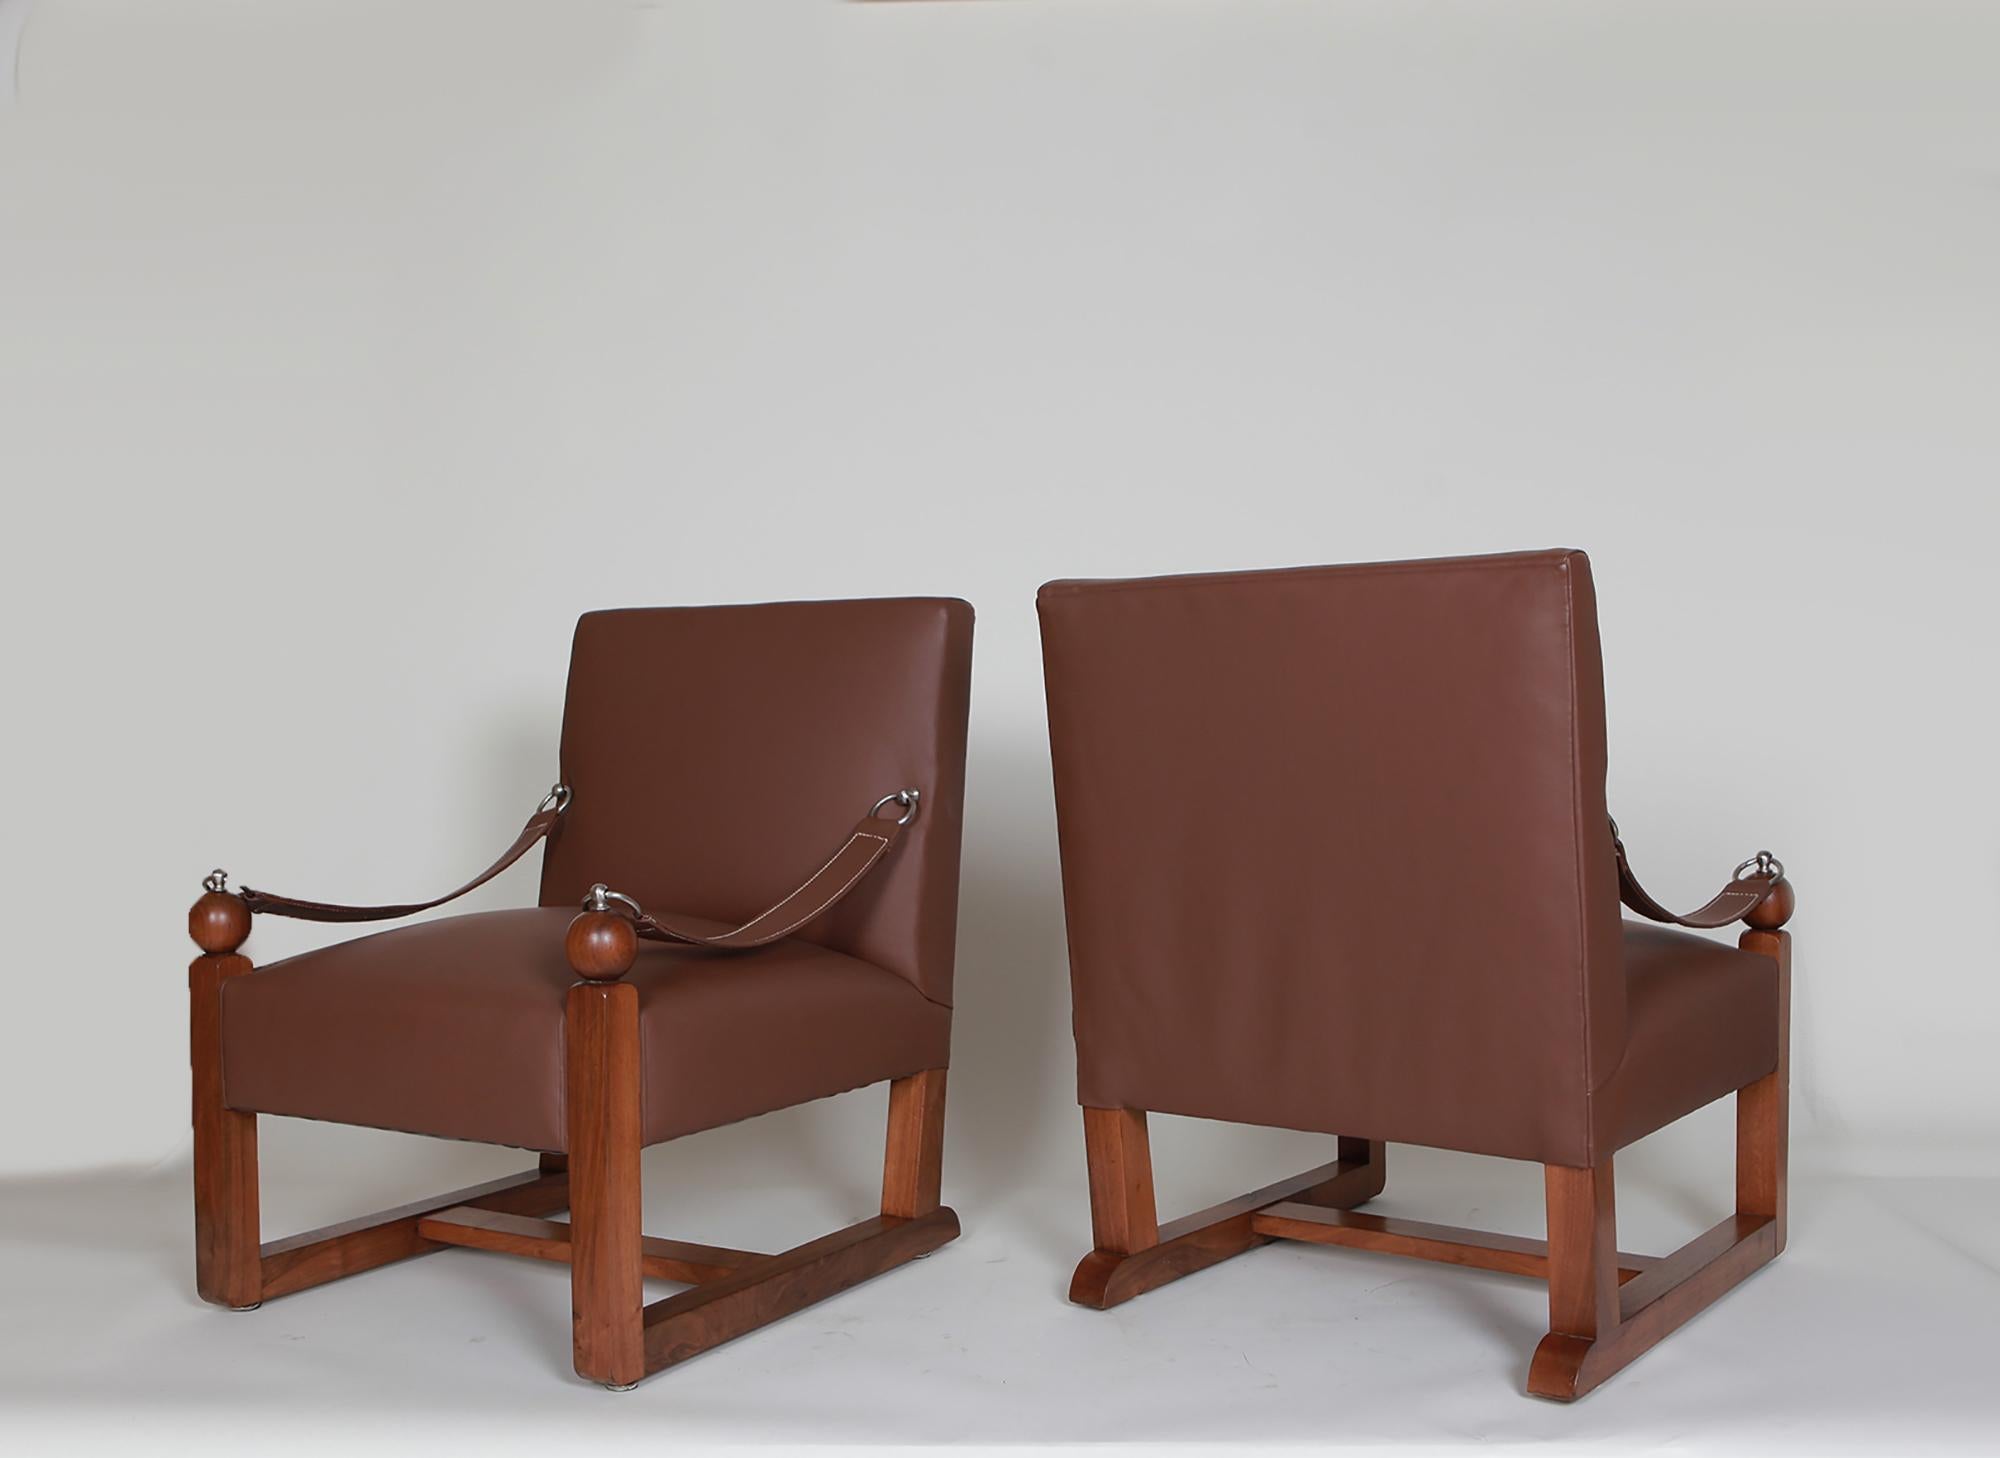 In the style of Jacques Adnet -Twin chairs, circa 1950.
Wood and leather.
32.5 H x 24 W x 26.8 D inches.
   